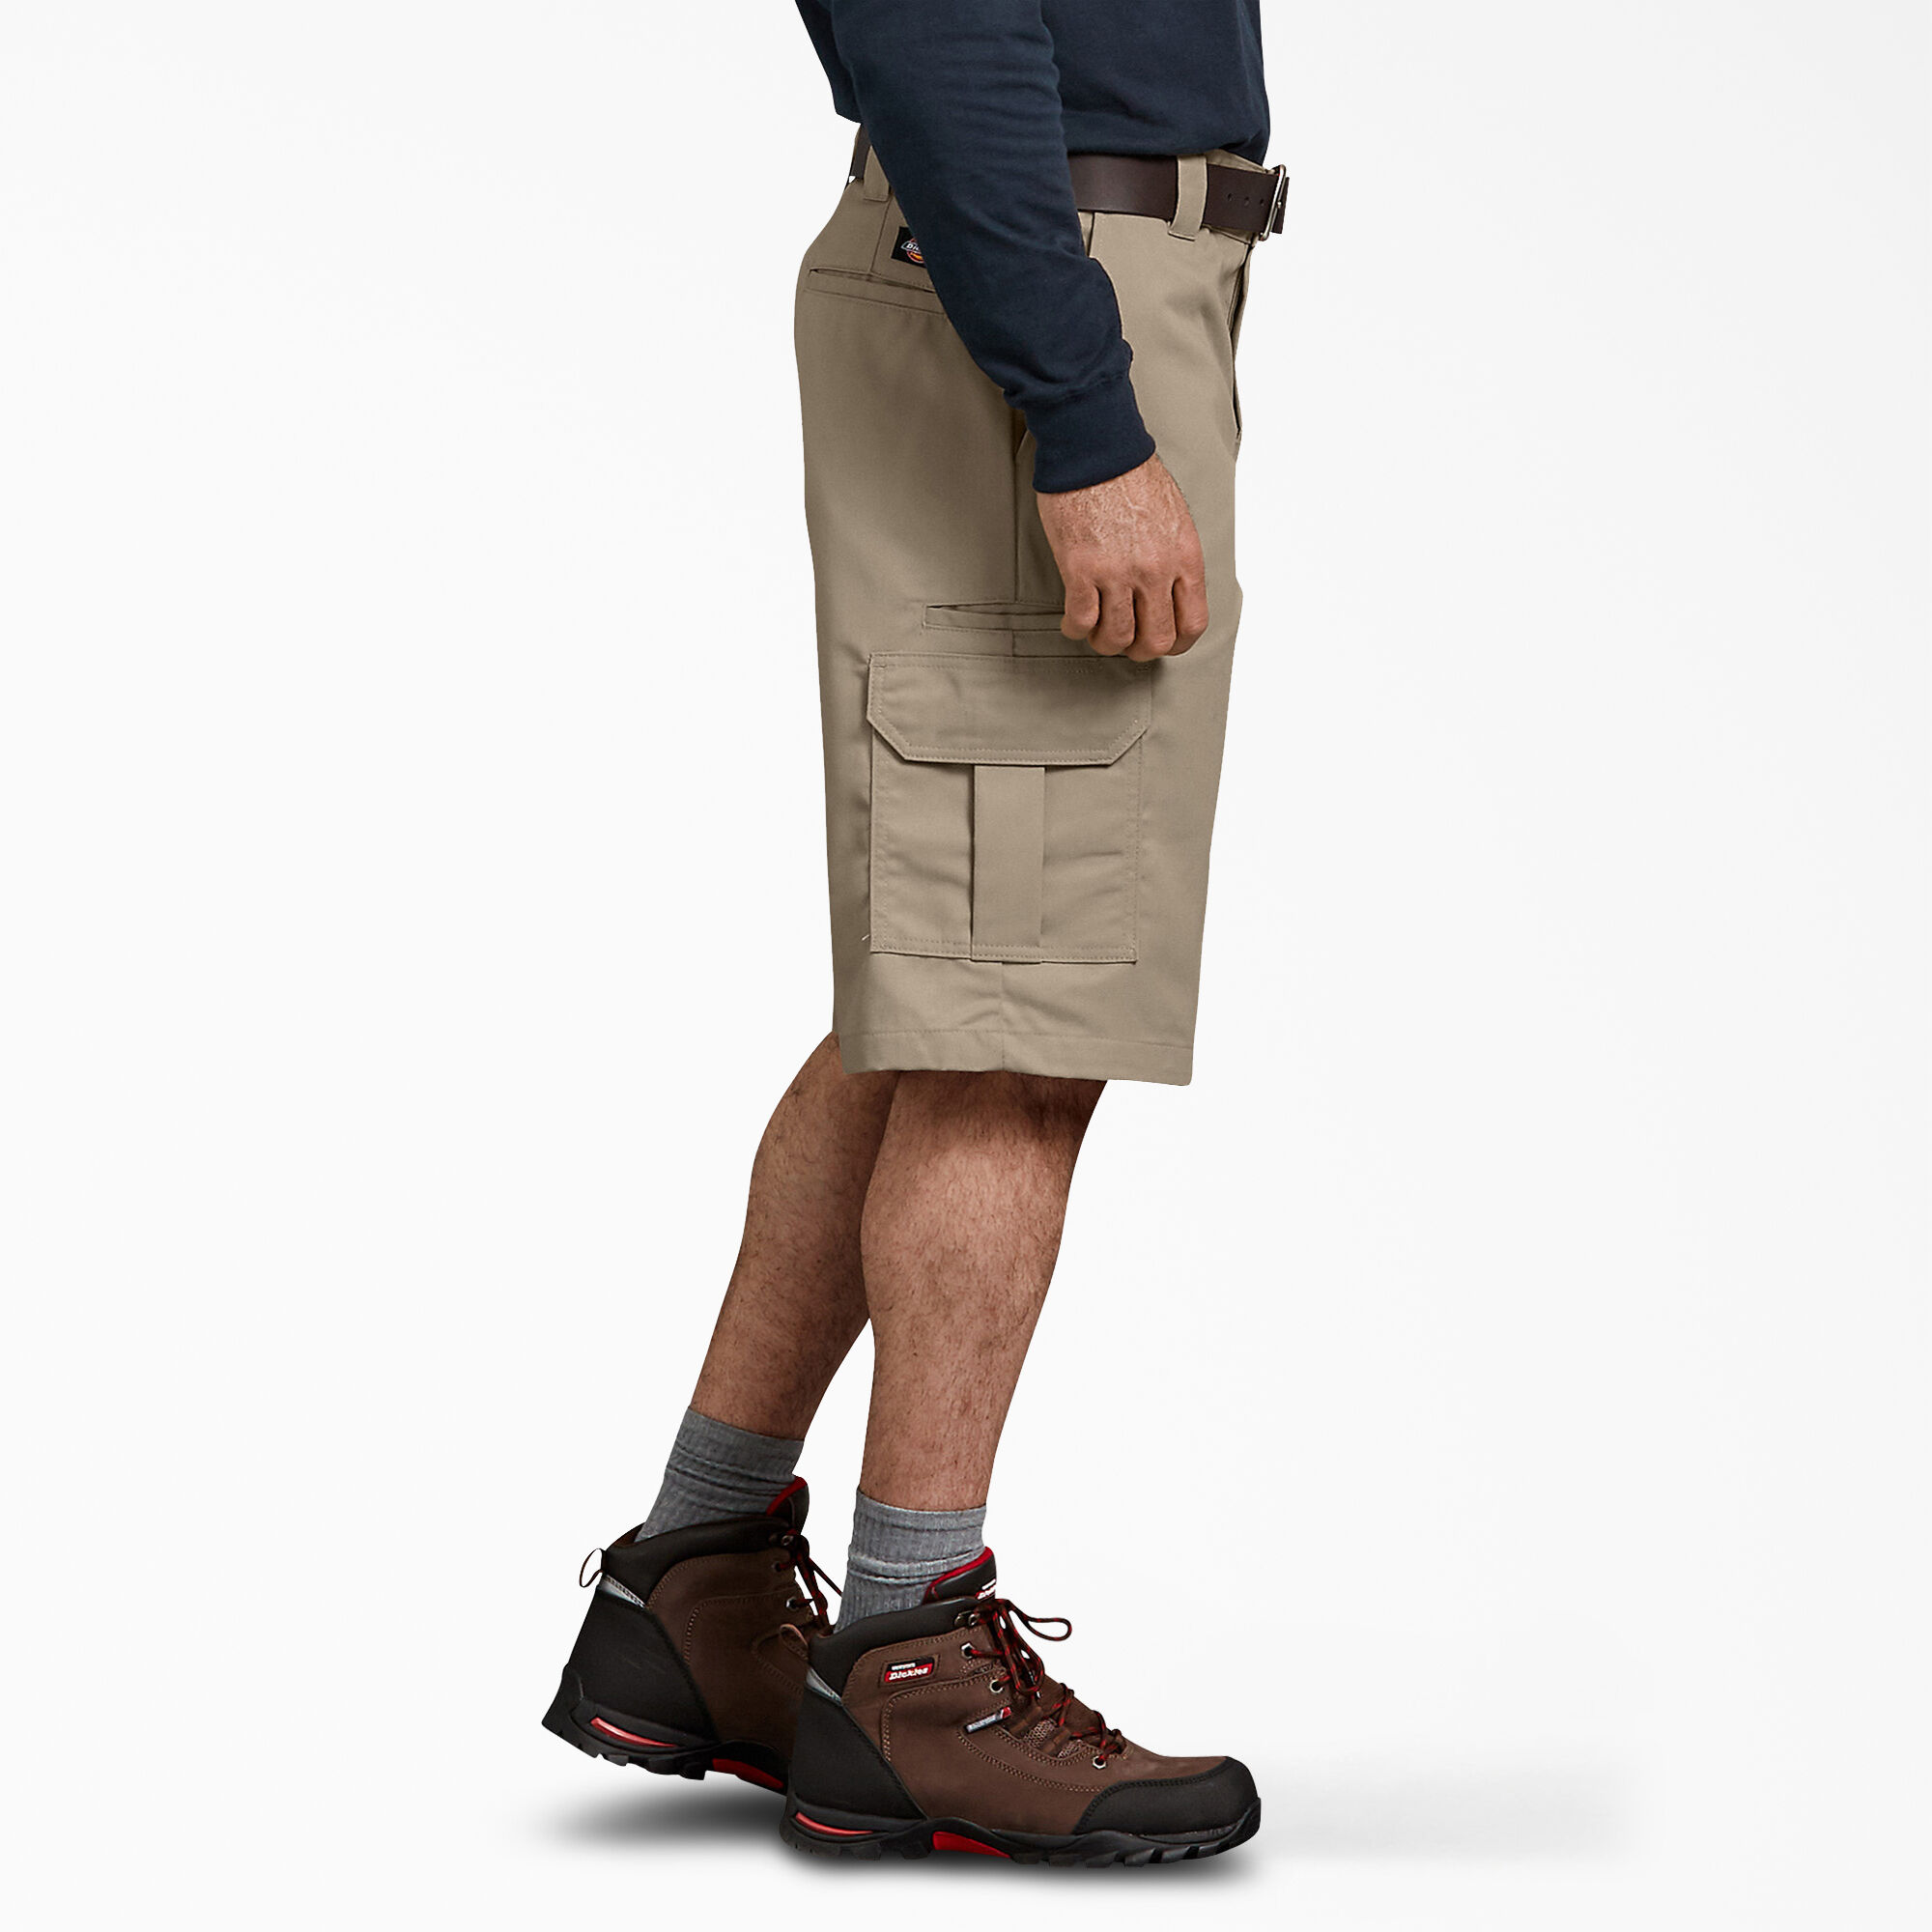 dickies flex relaxed fit cargo pants